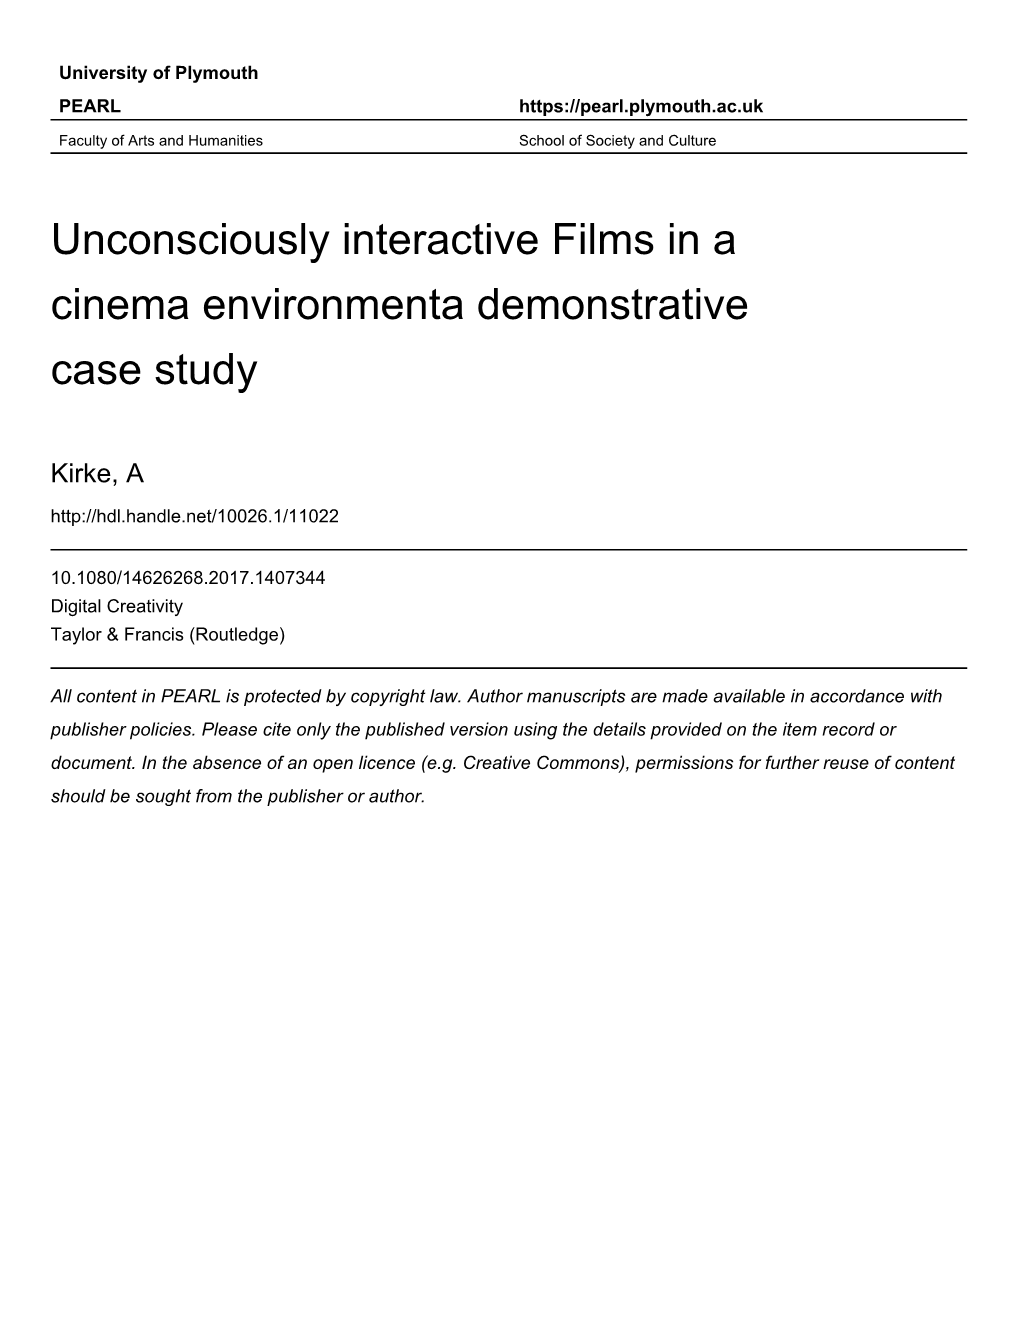 Unconsciously Interactive Films in a Cinema Environmenta Demonstrative Case Study